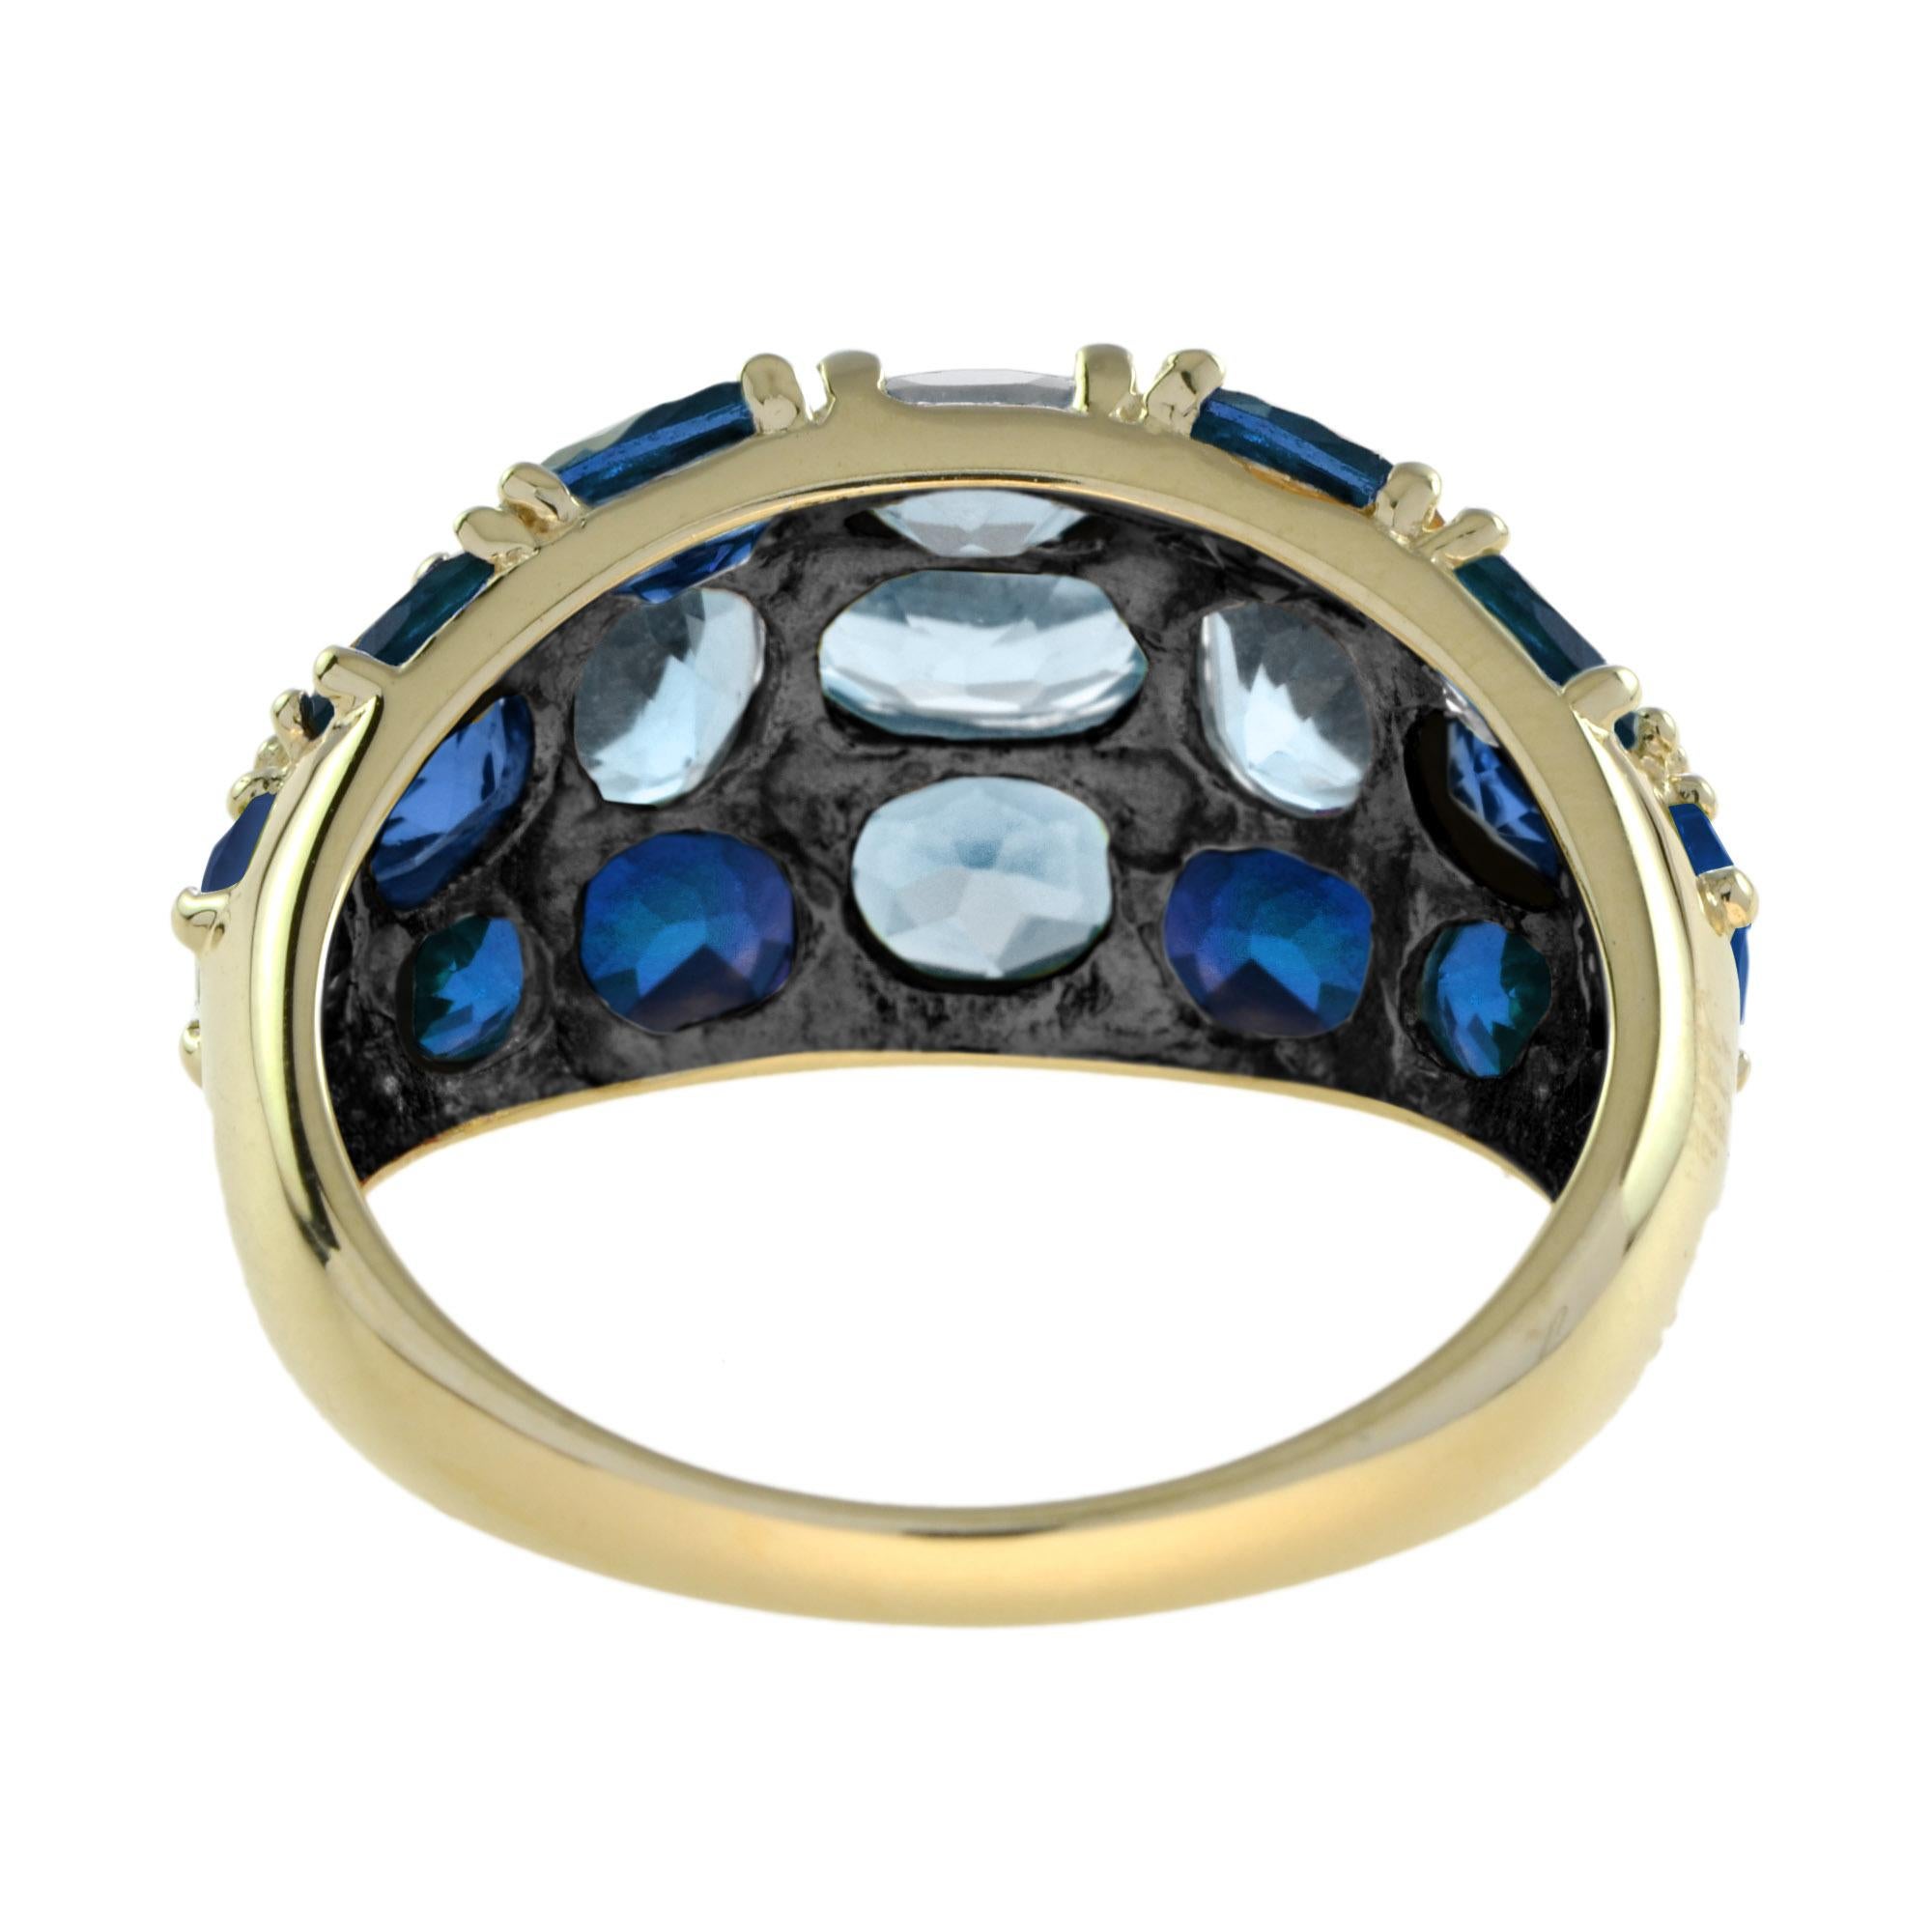 For Sale:  Vintage Style Blue Topaz and Sapphire Cocktail Ring in 14K Yellow Gold 6